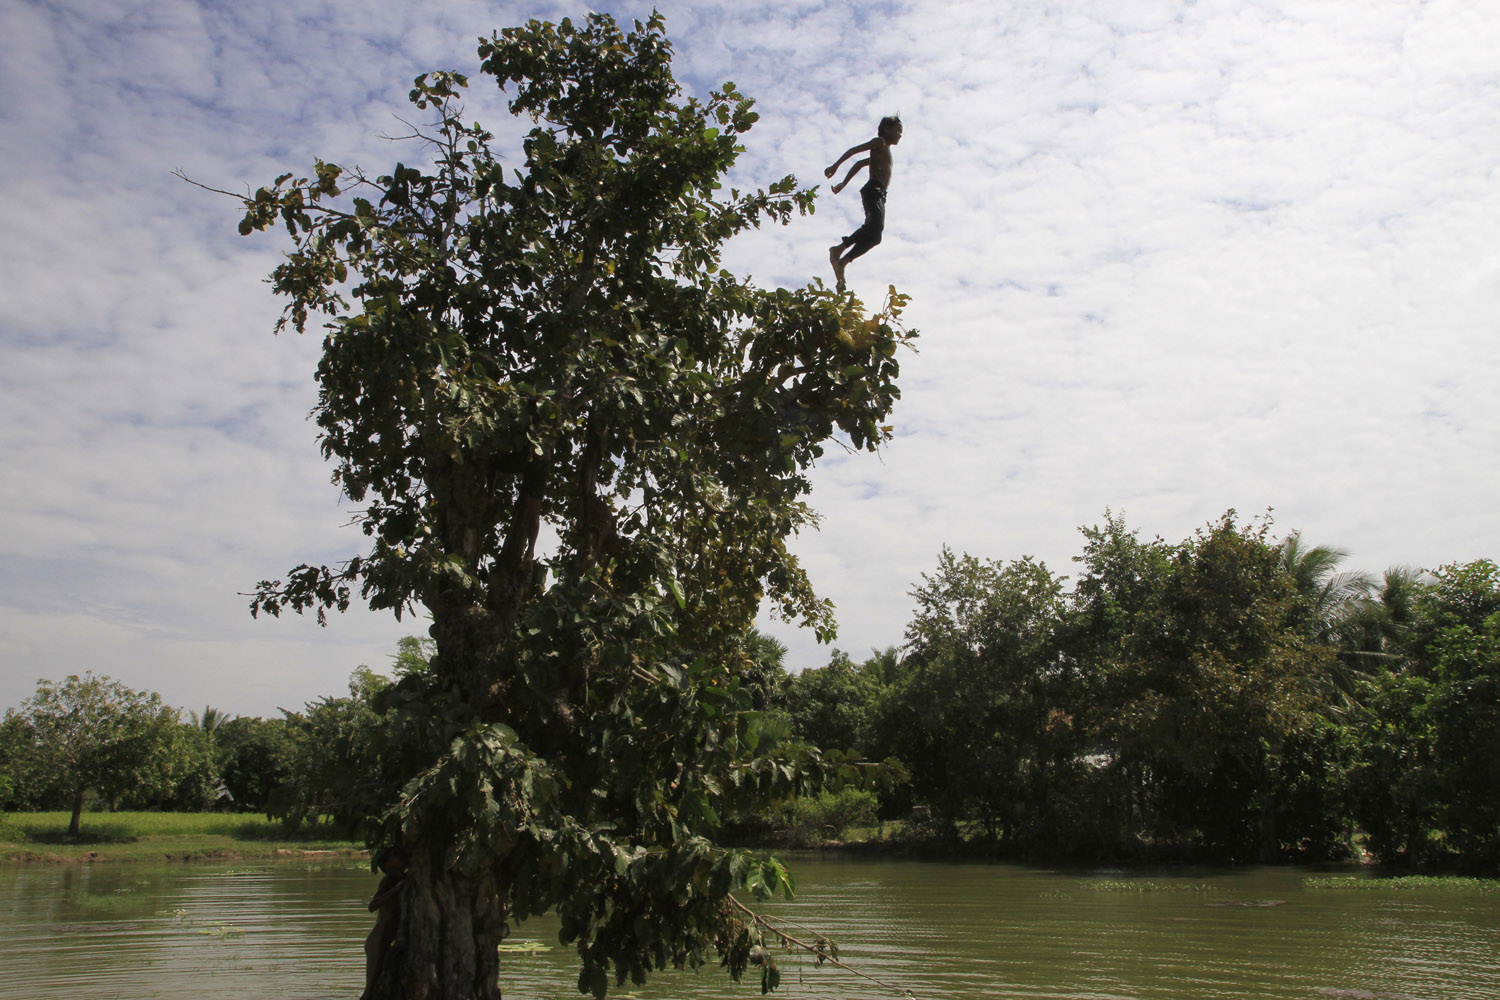 Nov. 21, 2013. A Cambodian boy jumps from a tree into a pond at a rice paddy farm on the outskirts of Phnom Penh, Cambodia,